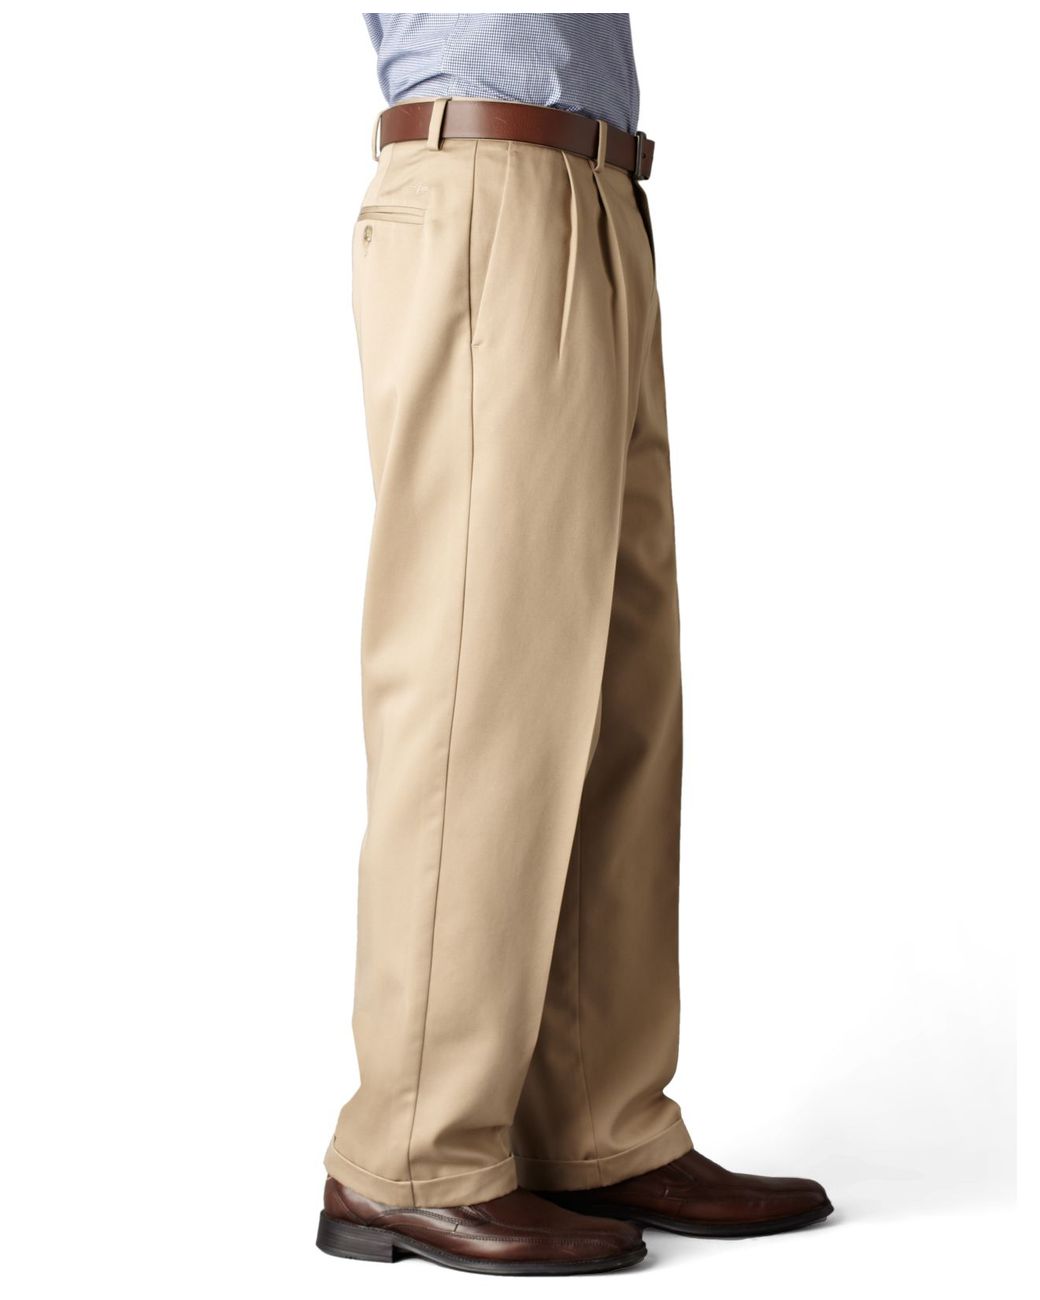 Dockers D4 Relaxed Fit Never Iron Essential Khaki Pleated Pants  Discontinued in Natural for Men | Lyst